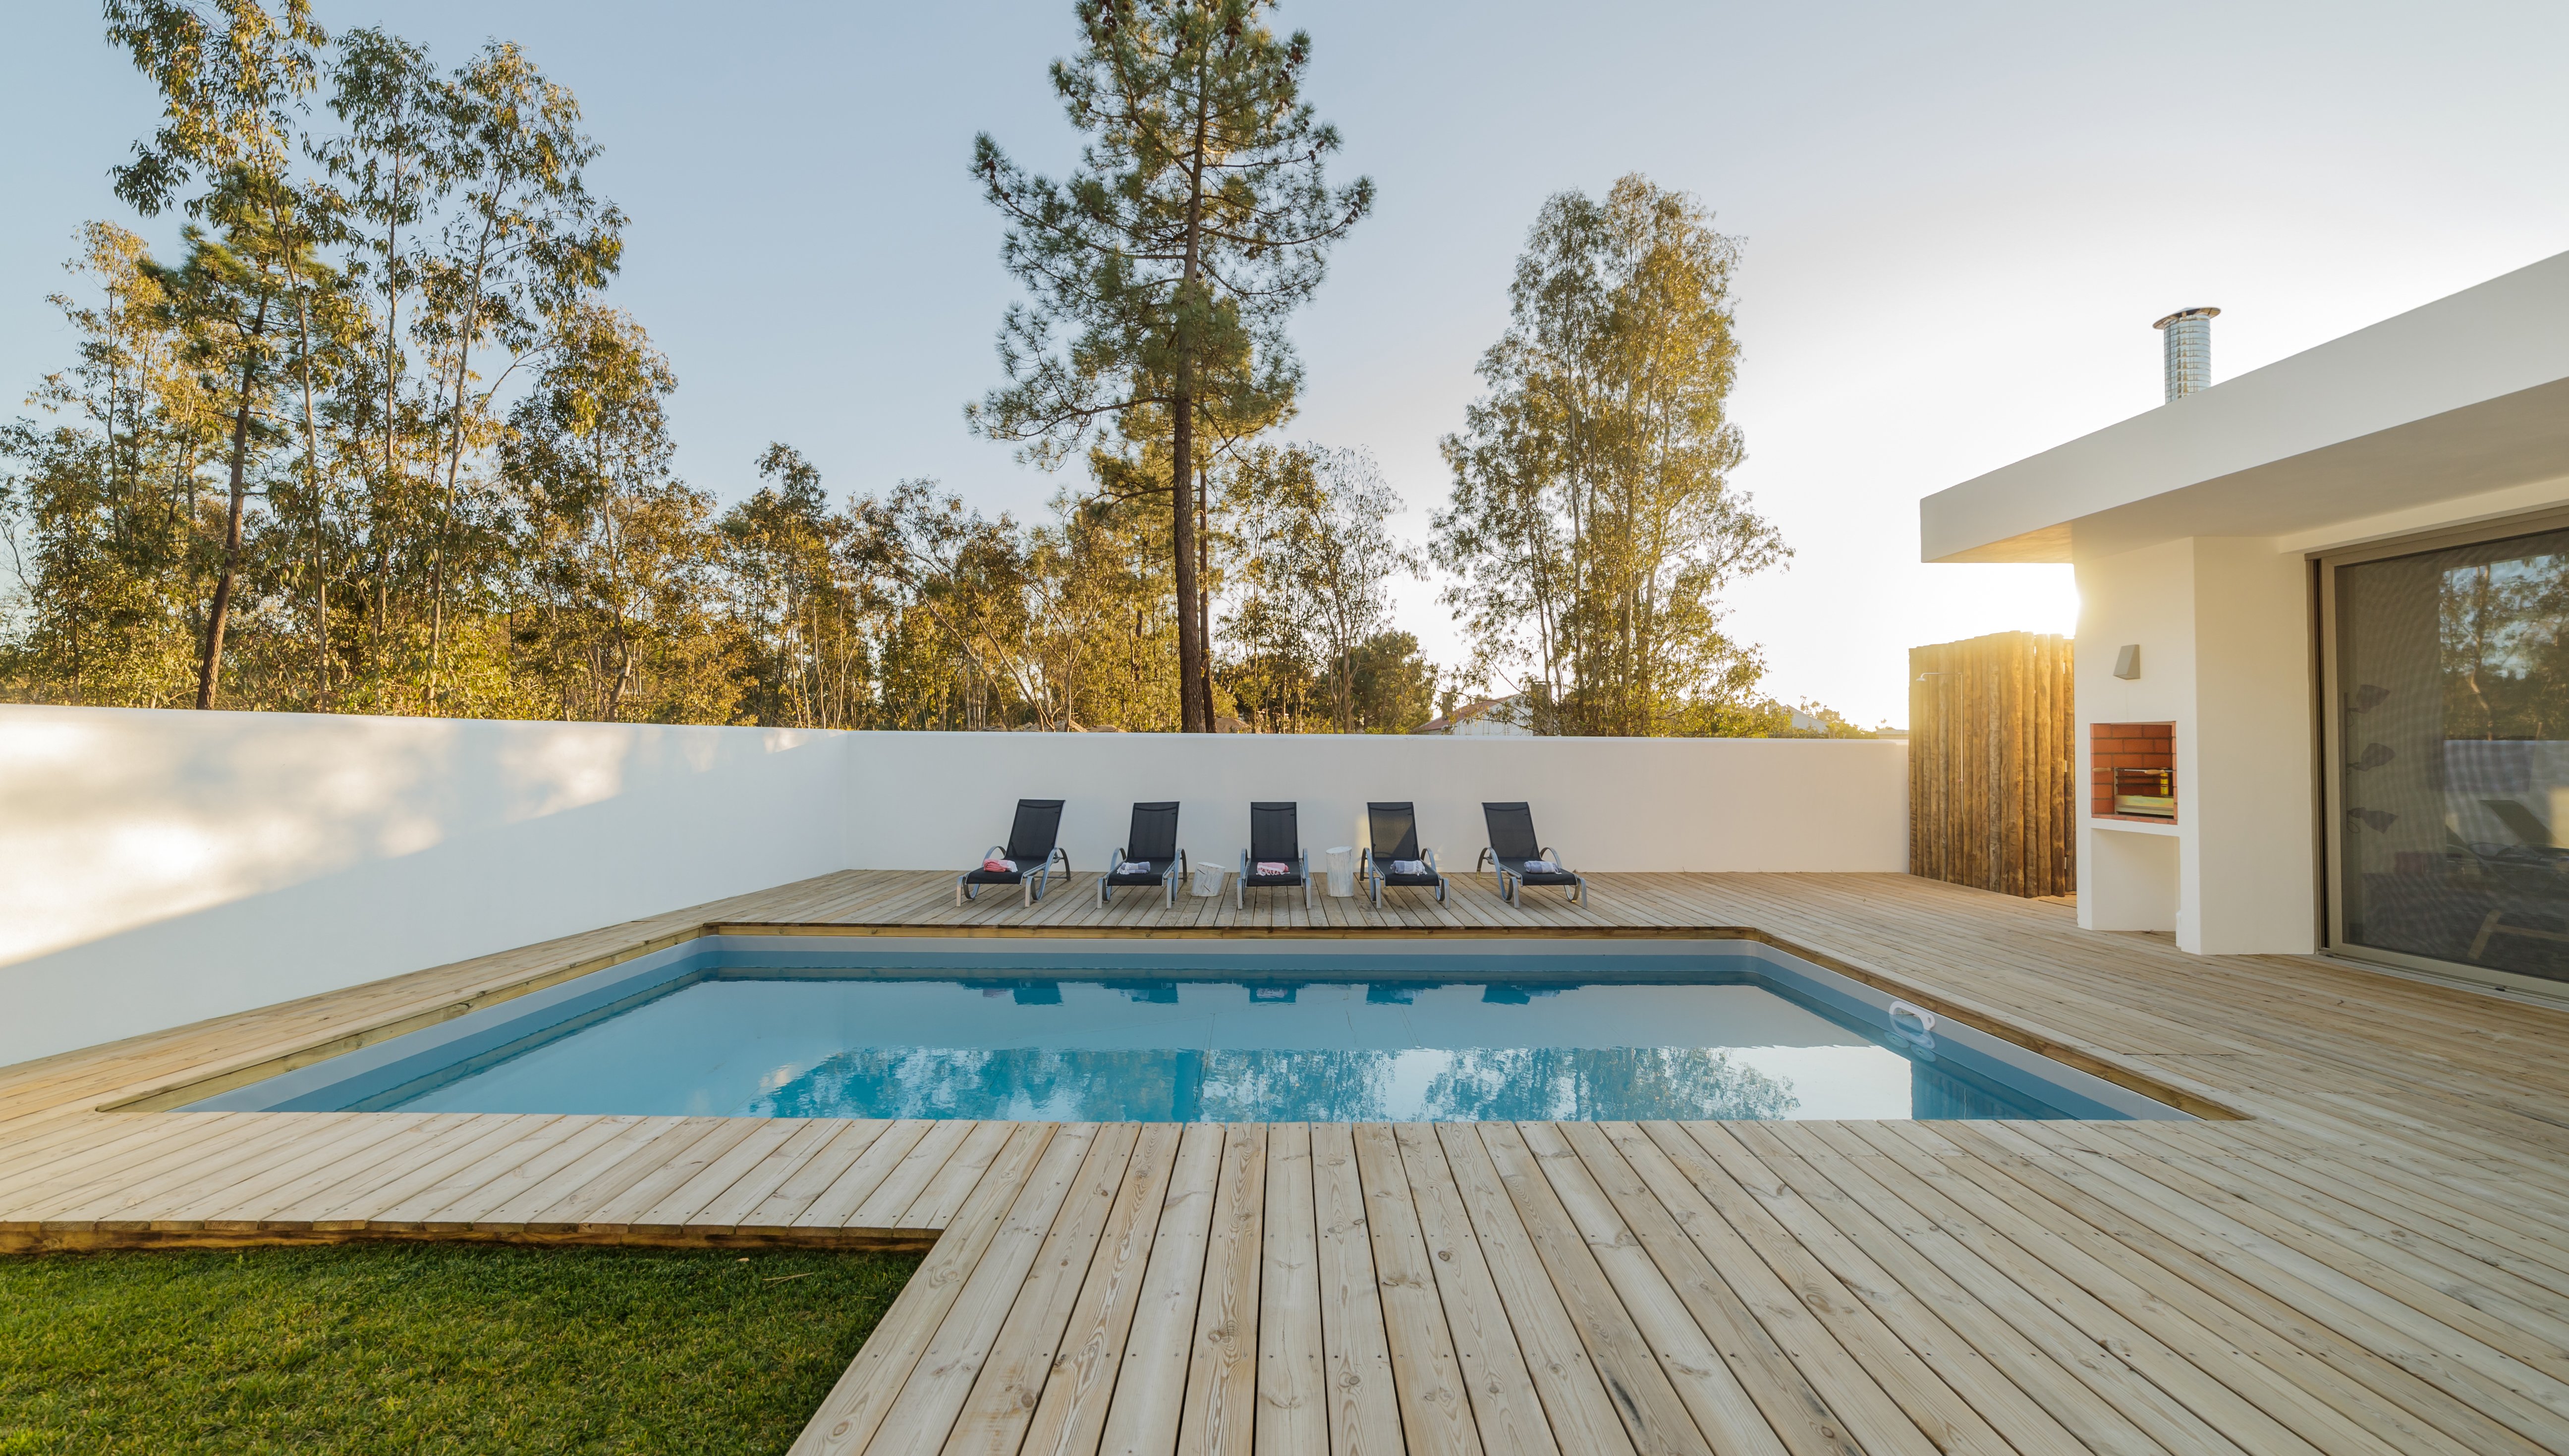 Wooden Decks for Inground Swimming Pools: Cost, Types, and More